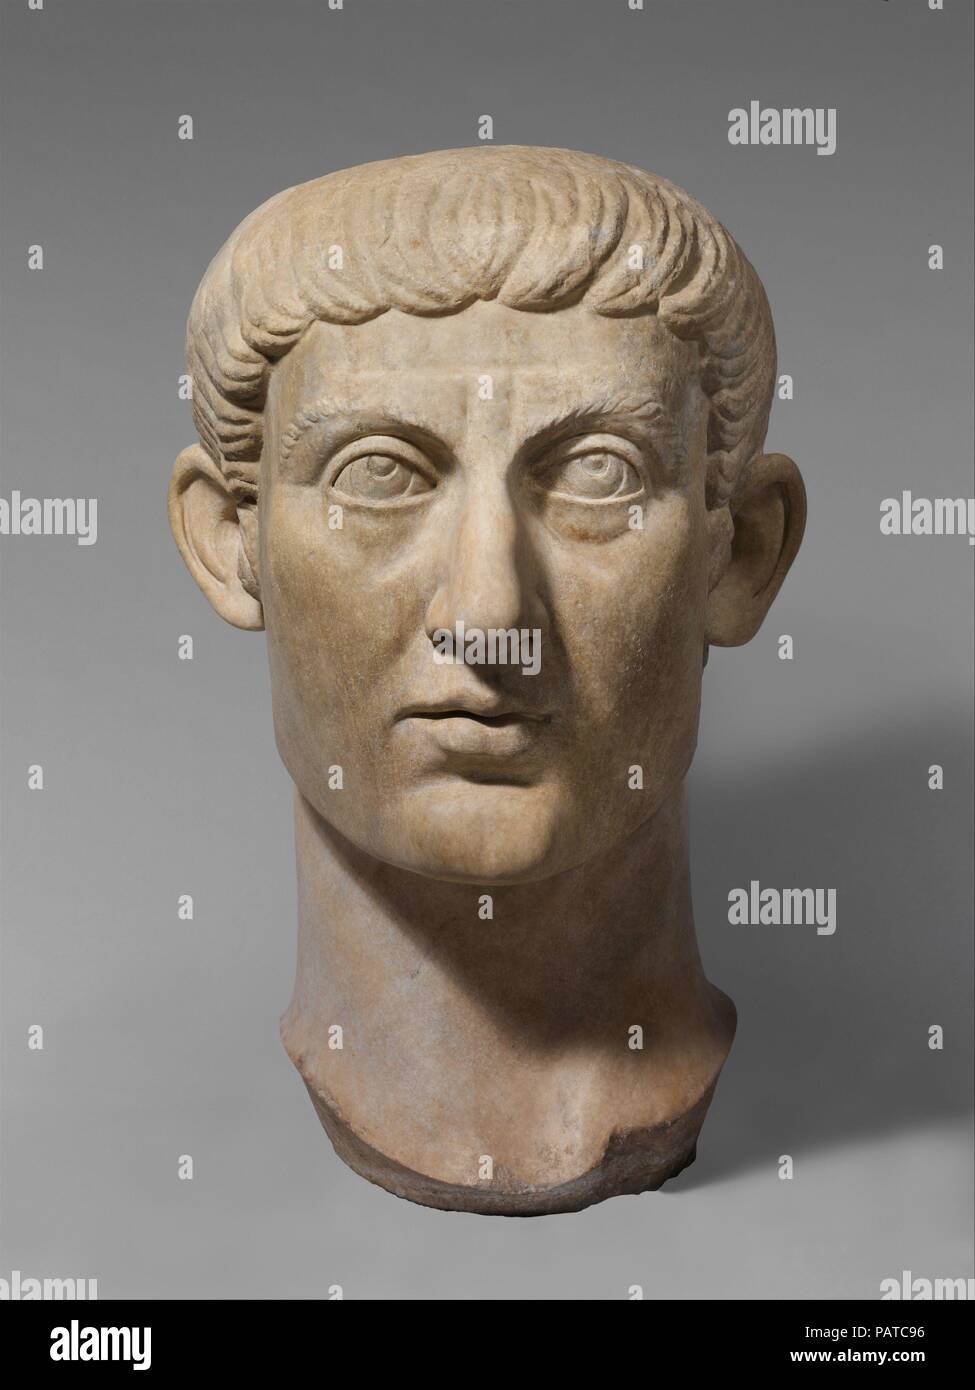 Marble portrait head of the Emperor Constantine I. Culture: Roman. Dimensions: 37 1/2 × 23 × 26 1/2 in., 1100 lb. (95.3 × 58.4 × 67.3 cm, 499 kg). Date: ca. A.D. 325-370.  Constantine the Great was the first Christian emperor of Rome, and his reign had a profound effect on the subsequent development of the Roman, later Byzantine, world. By 325 he had succeeded in reunifying the empire, having defeated the last of his former tetrarchic colleagues, the eastern emperor Licinius. He thereafter aimed to establish a new dynasty and to found a new capital, named Constantinople after himself. Christia Stock Photo